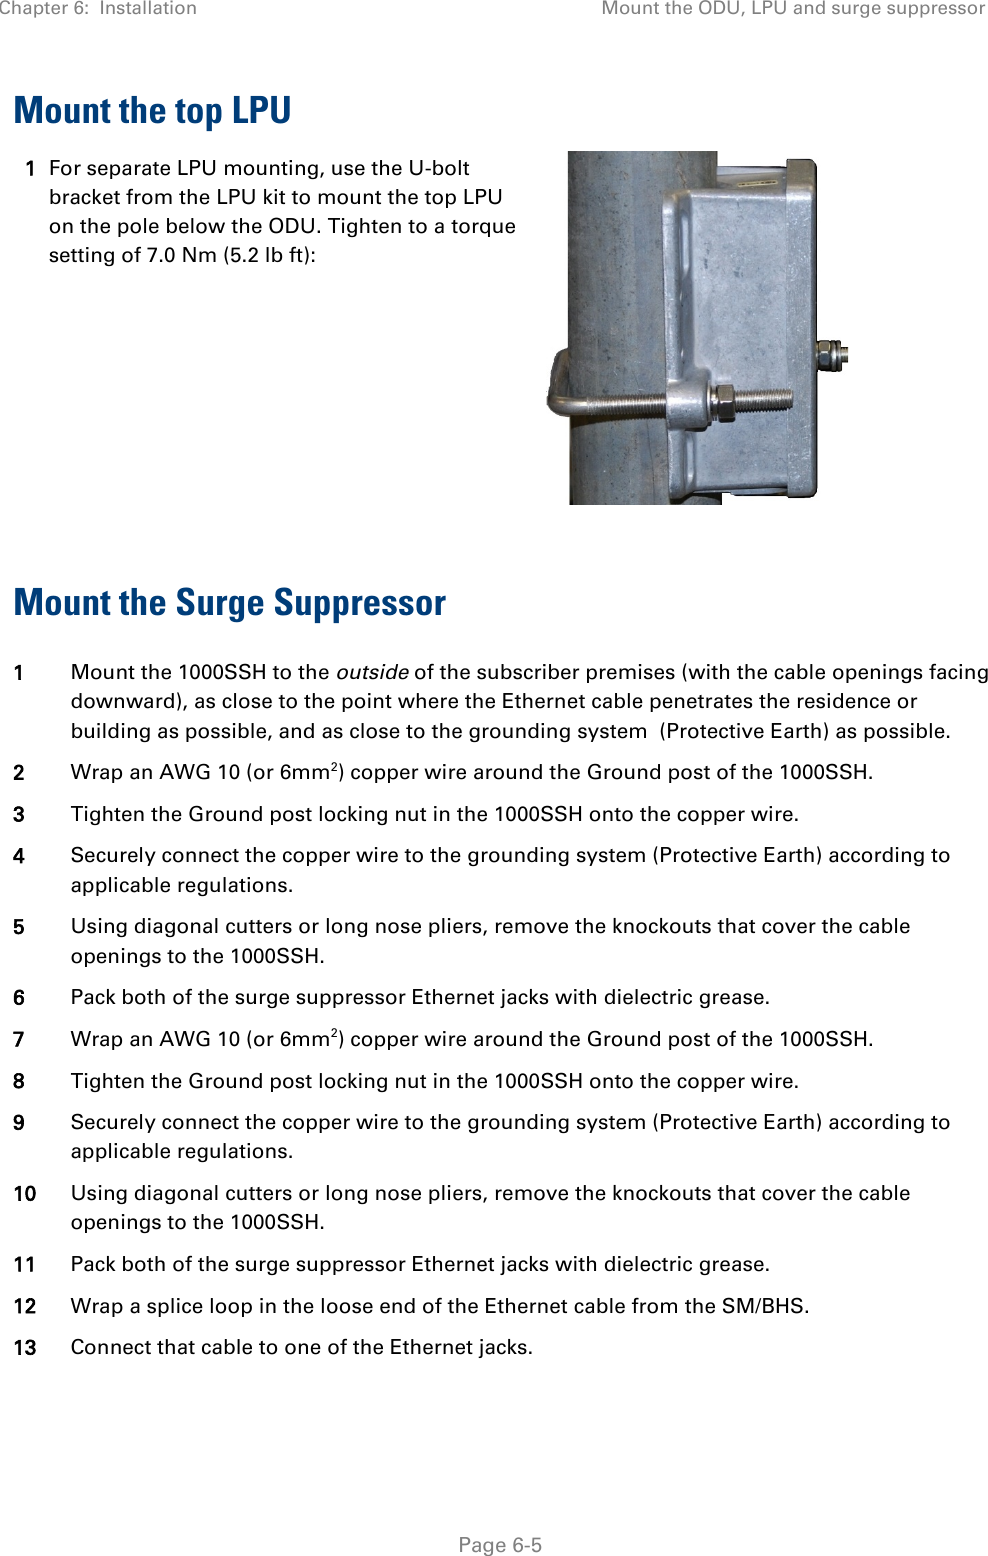 Chapter 6:  Installation Mount the ODU, LPU and surge suppressor   Page 6-5 Mount the top LPU 1 For separate LPU mounting, use the U-bolt bracket from the LPU kit to mount the top LPU on the pole below the ODU. Tighten to a torque setting of 7.0 Nm (5.2 lb ft):   Mount the Surge Suppressor 1 Mount the 1000SSH to the outside of the subscriber premises (with the cable openings facing downward), as close to the point where the Ethernet cable penetrates the residence or building as possible, and as close to the grounding system  (Protective Earth) as possible. 2 Wrap an AWG 10 (or 6mm2) copper wire around the Ground post of the 1000SSH. 3 Tighten the Ground post locking nut in the 1000SSH onto the copper wire. 4 Securely connect the copper wire to the grounding system (Protective Earth) according to applicable regulations. 5 Using diagonal cutters or long nose pliers, remove the knockouts that cover the cable openings to the 1000SSH. 6 Pack both of the surge suppressor Ethernet jacks with dielectric grease. 7 Wrap an AWG 10 (or 6mm2) copper wire around the Ground post of the 1000SSH. 8 Tighten the Ground post locking nut in the 1000SSH onto the copper wire. 9 Securely connect the copper wire to the grounding system (Protective Earth) according to applicable regulations. 10 Using diagonal cutters or long nose pliers, remove the knockouts that cover the cable openings to the 1000SSH. 11 Pack both of the surge suppressor Ethernet jacks with dielectric grease. 12 Wrap a splice loop in the loose end of the Ethernet cable from the SM/BHS. 13 Connect that cable to one of the Ethernet jacks. 